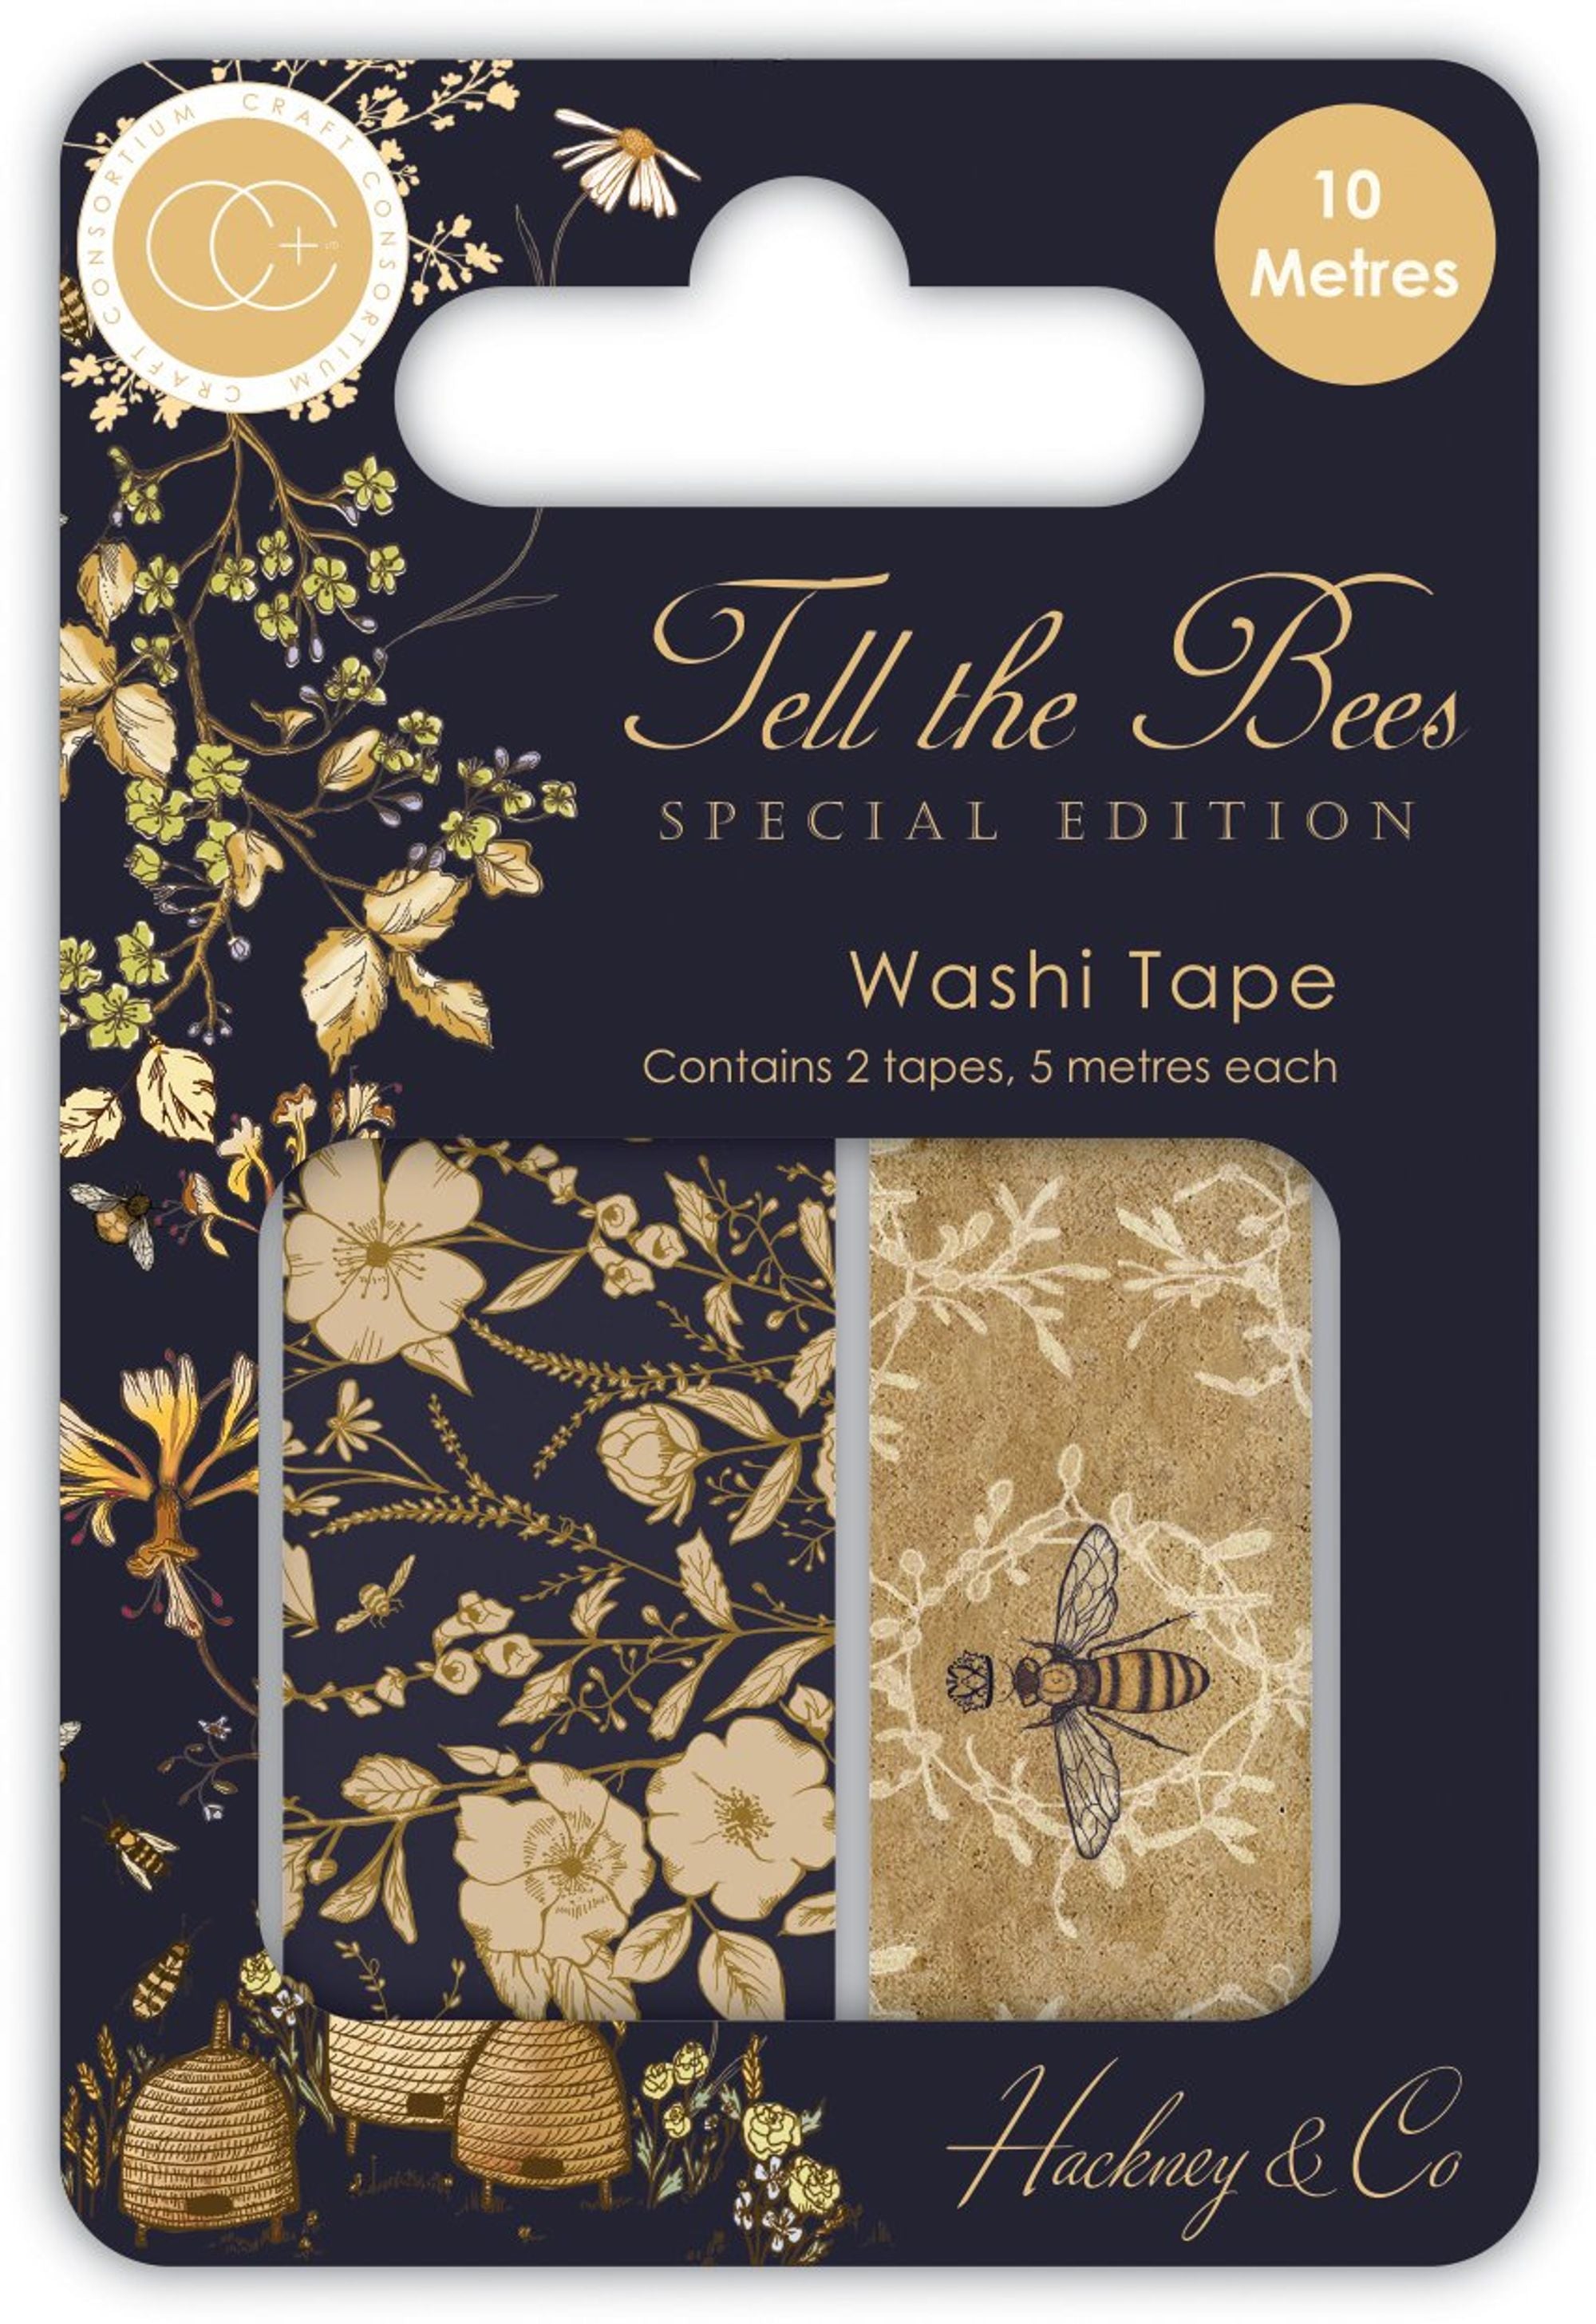 Tell the Bees - Special Edition - Washi Tape